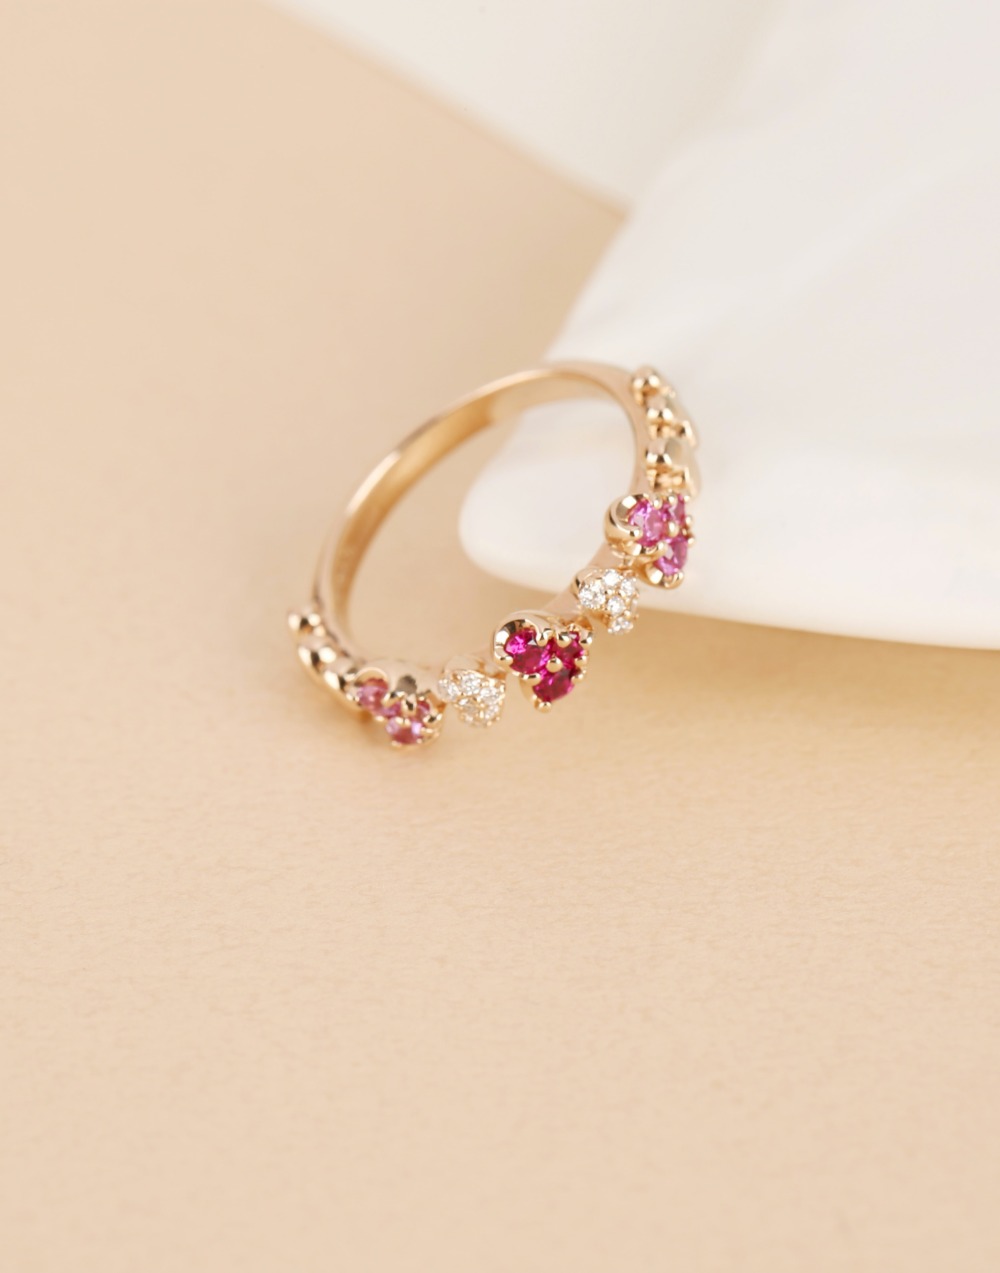 Red Rose Like Diamond, Ruby, Pink Sapphire Ring